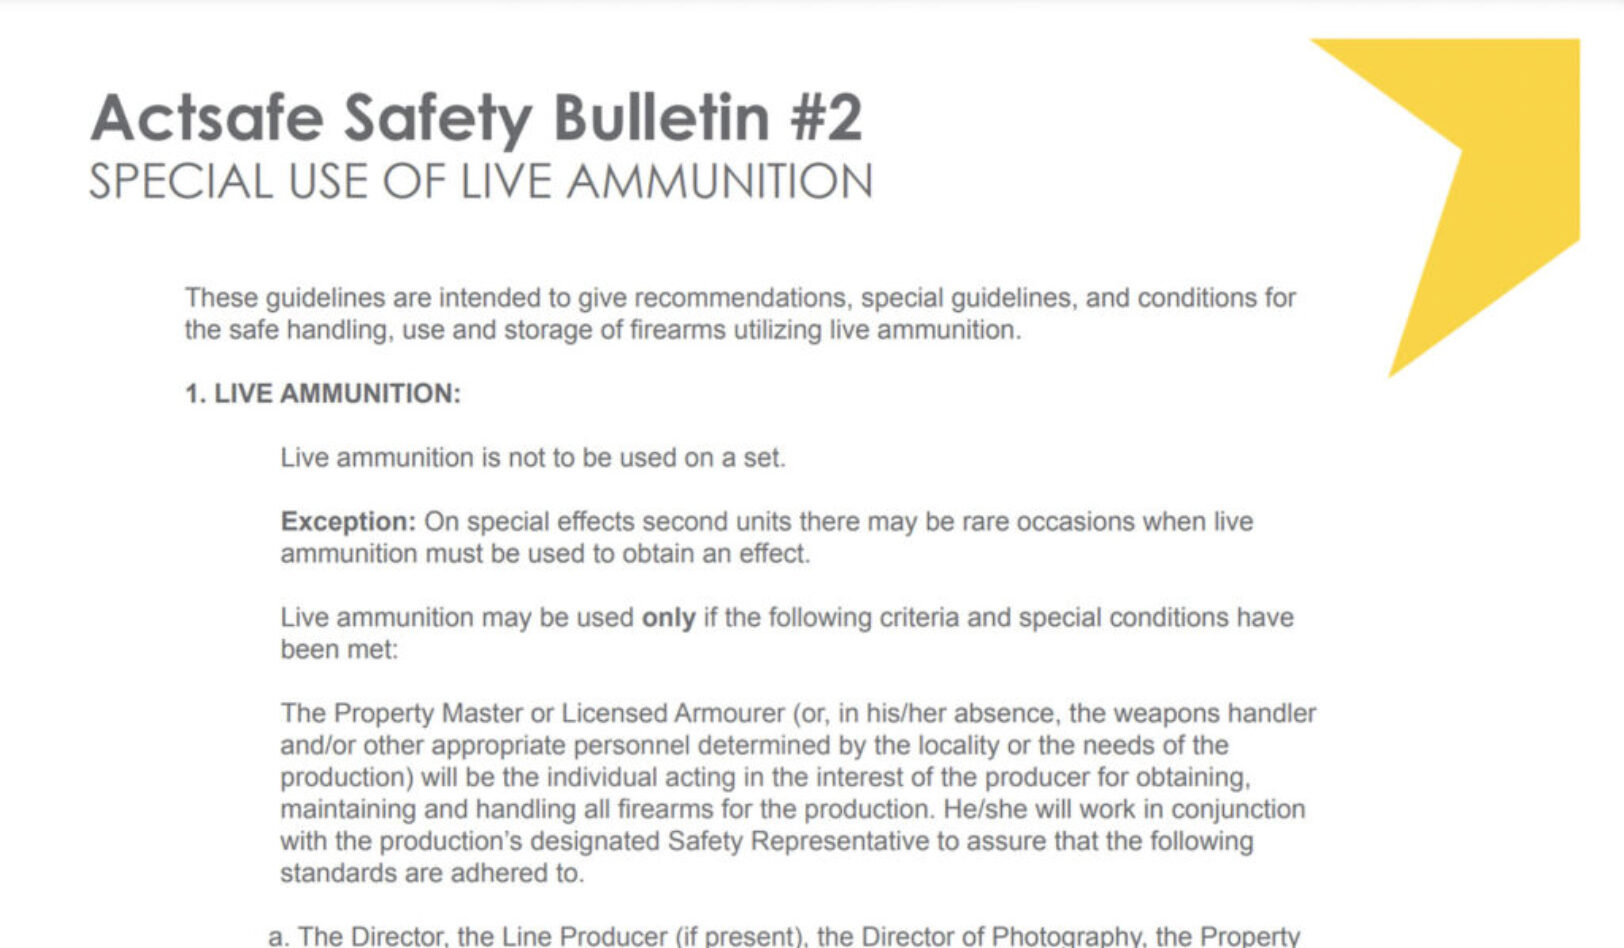 #2 Special Use of Live Ammunition Motion Picture Safety Bulletin